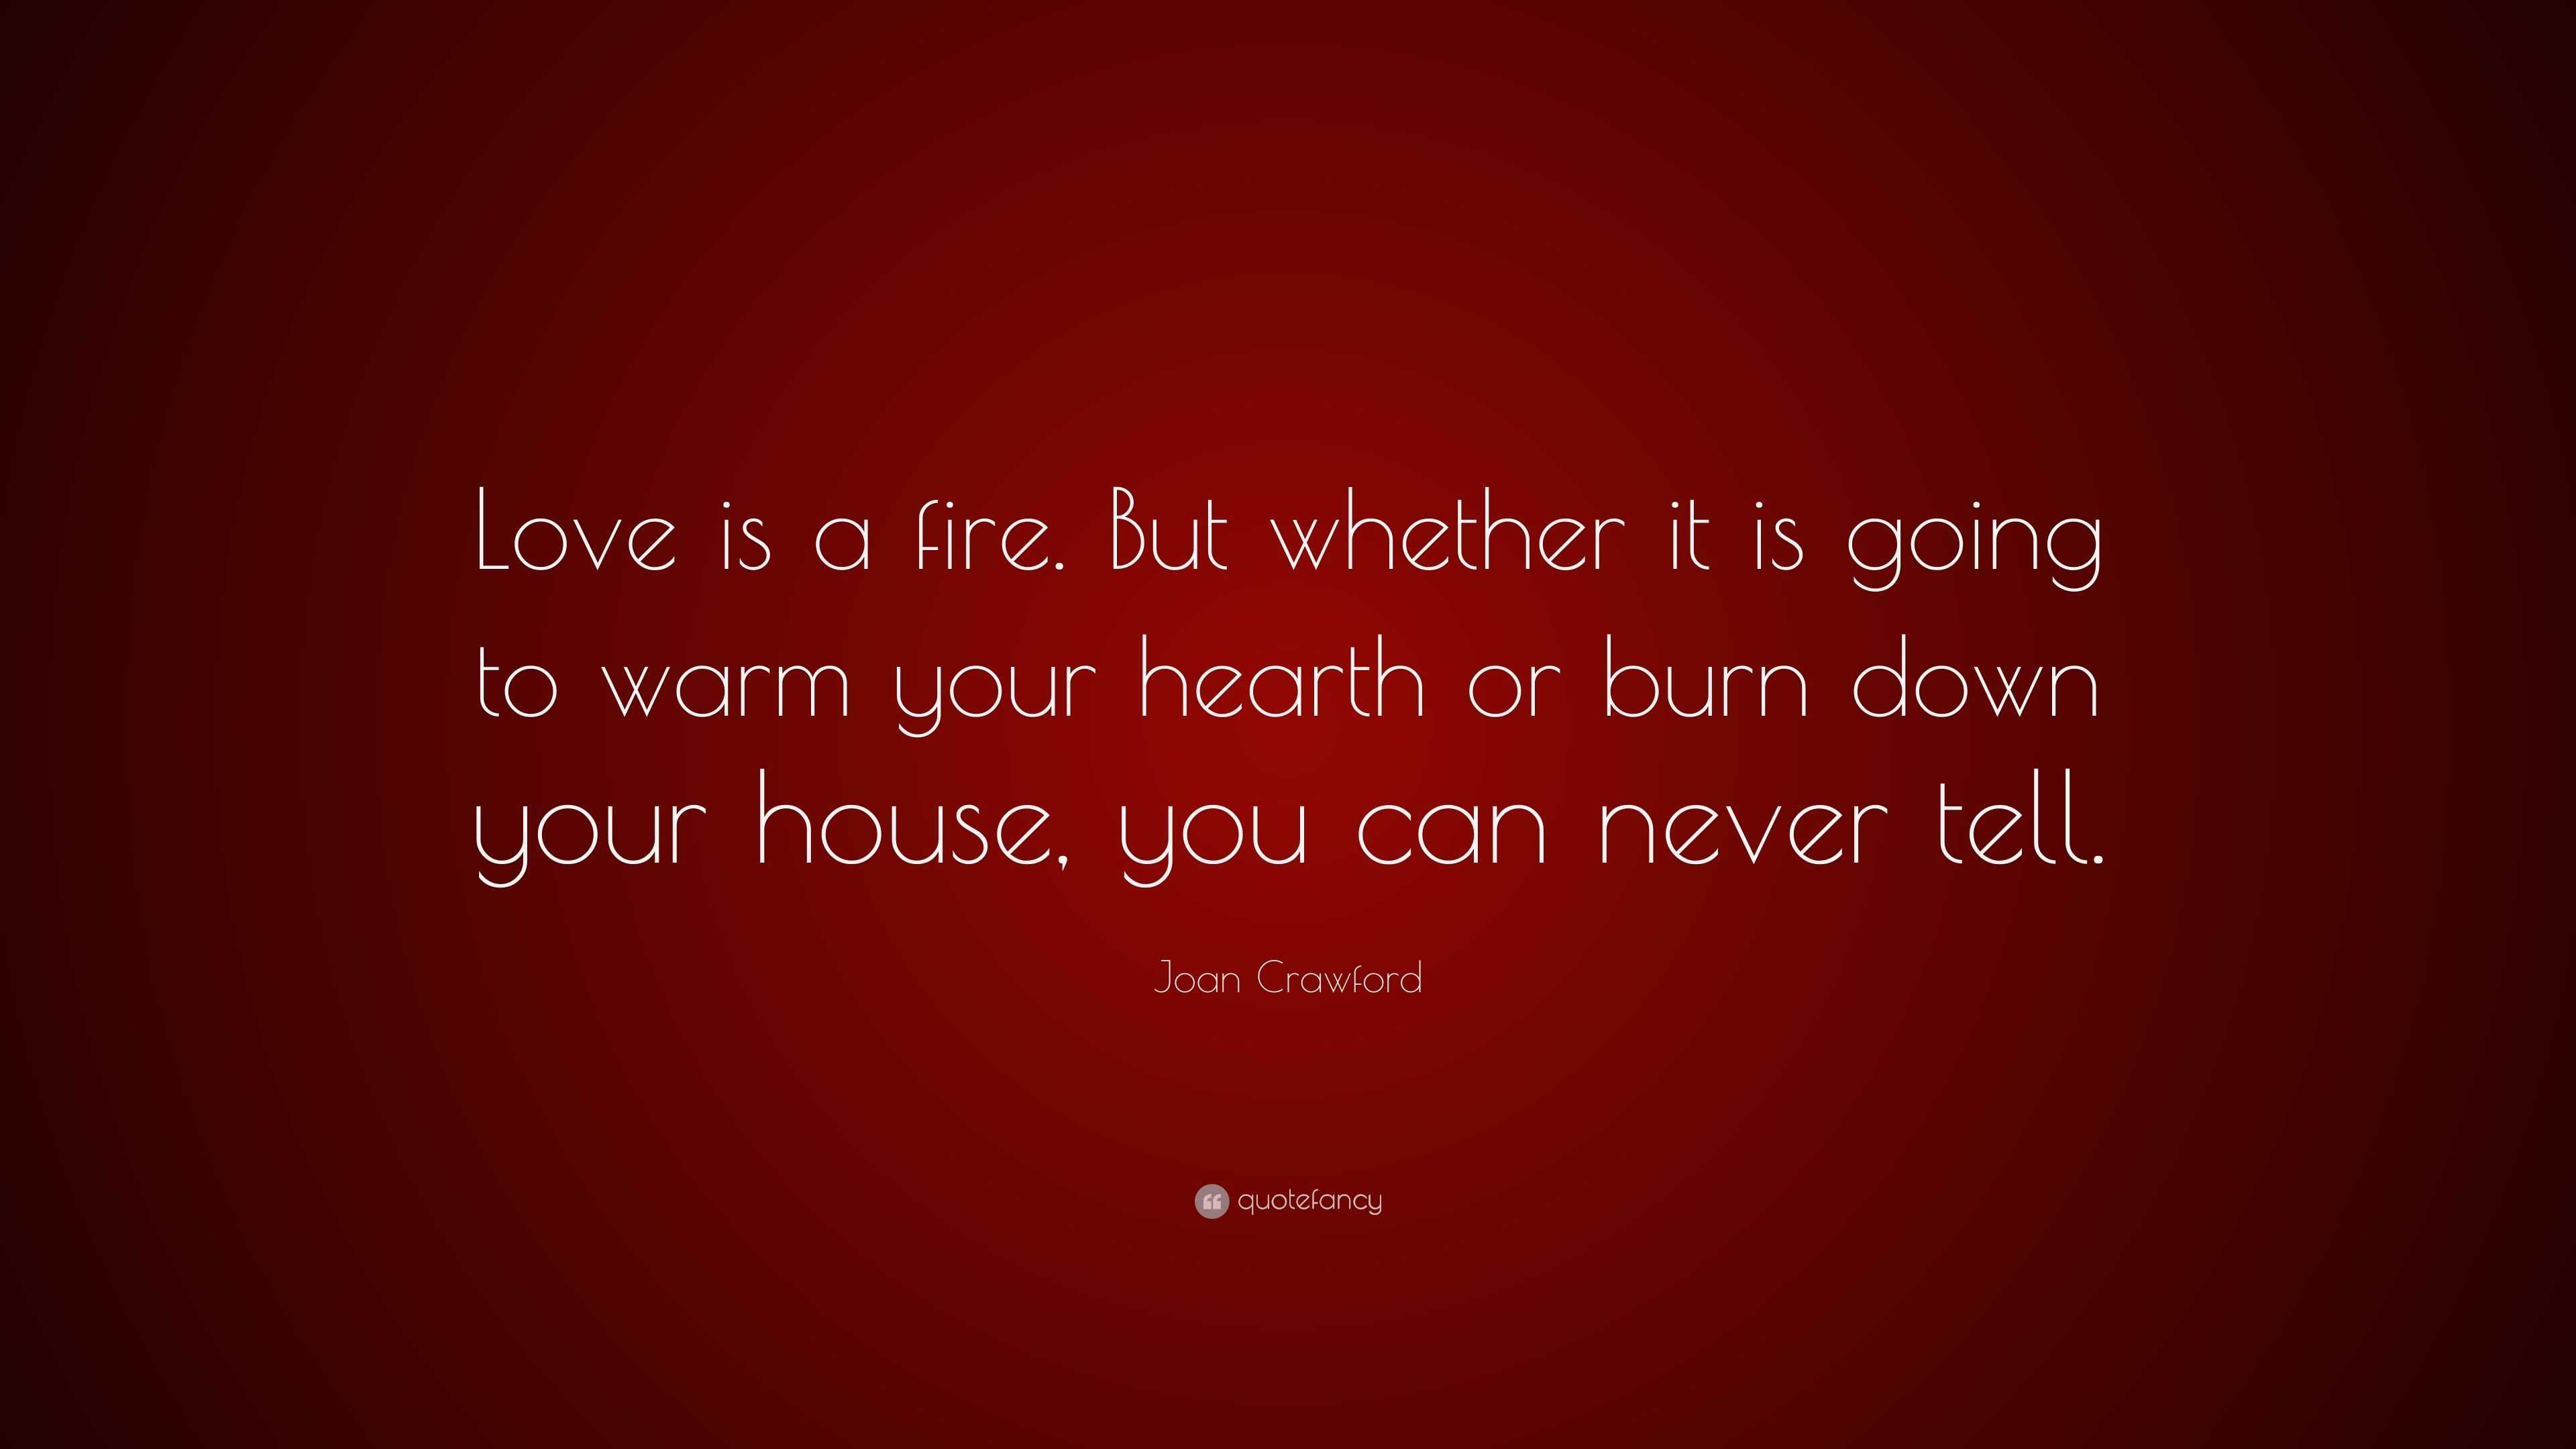 Joan Crawford Quote “love Is A Fire But Whether It Is Going To Warm Your Hearth Or Burn Down